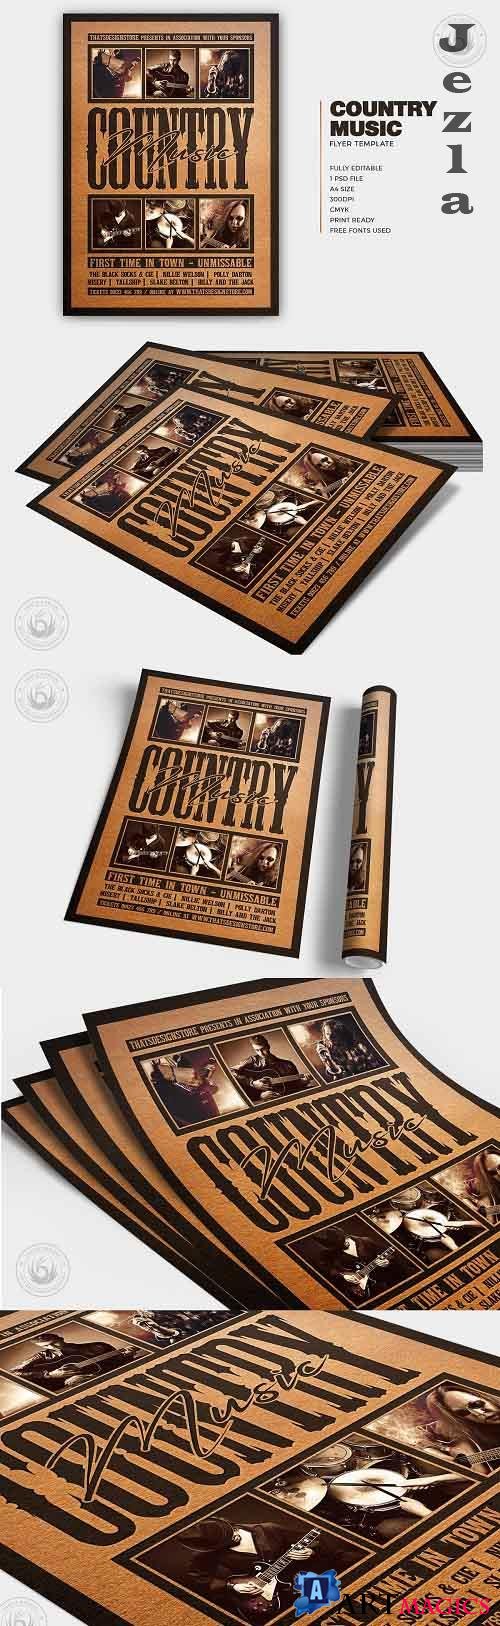 Country Music Flyer Template V4 - 5758525